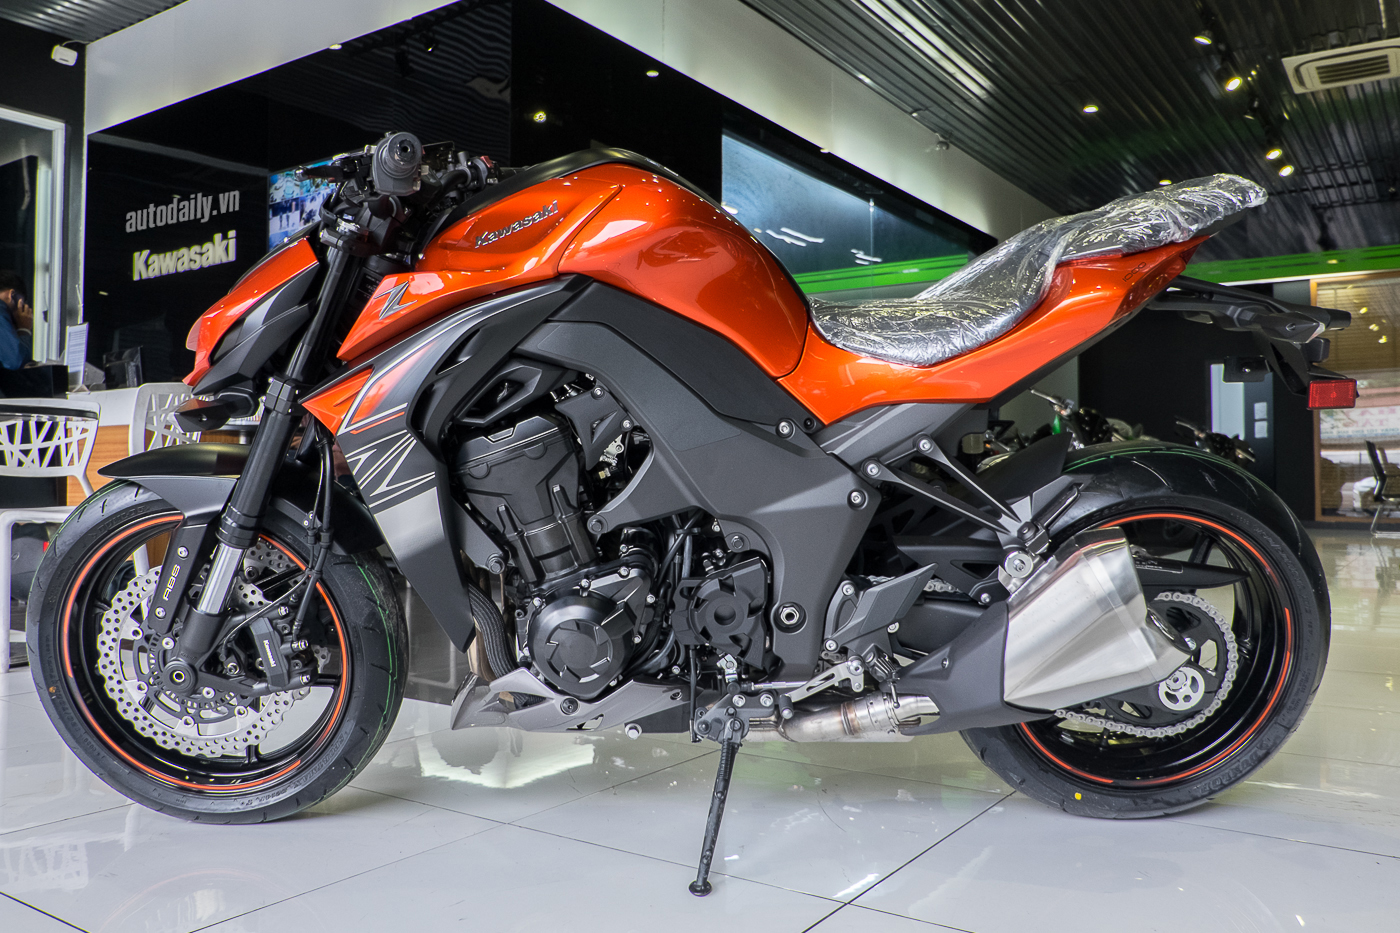 The beast is waiting for you, Kawasaki z1000 2017, full 